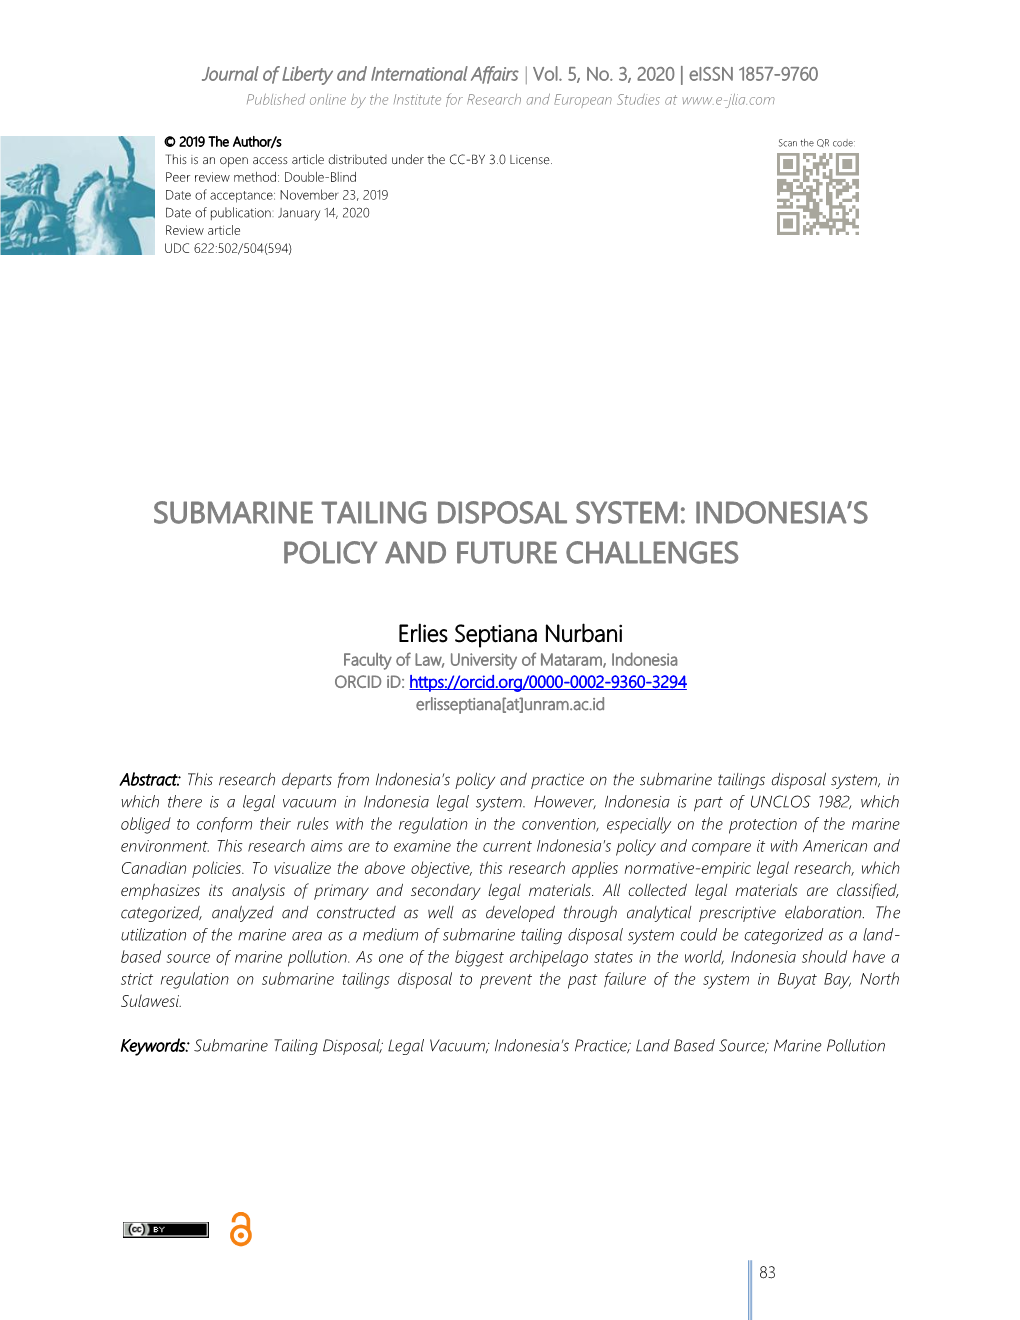 Submarine Tailing Disposal System: Indonesia's Policy